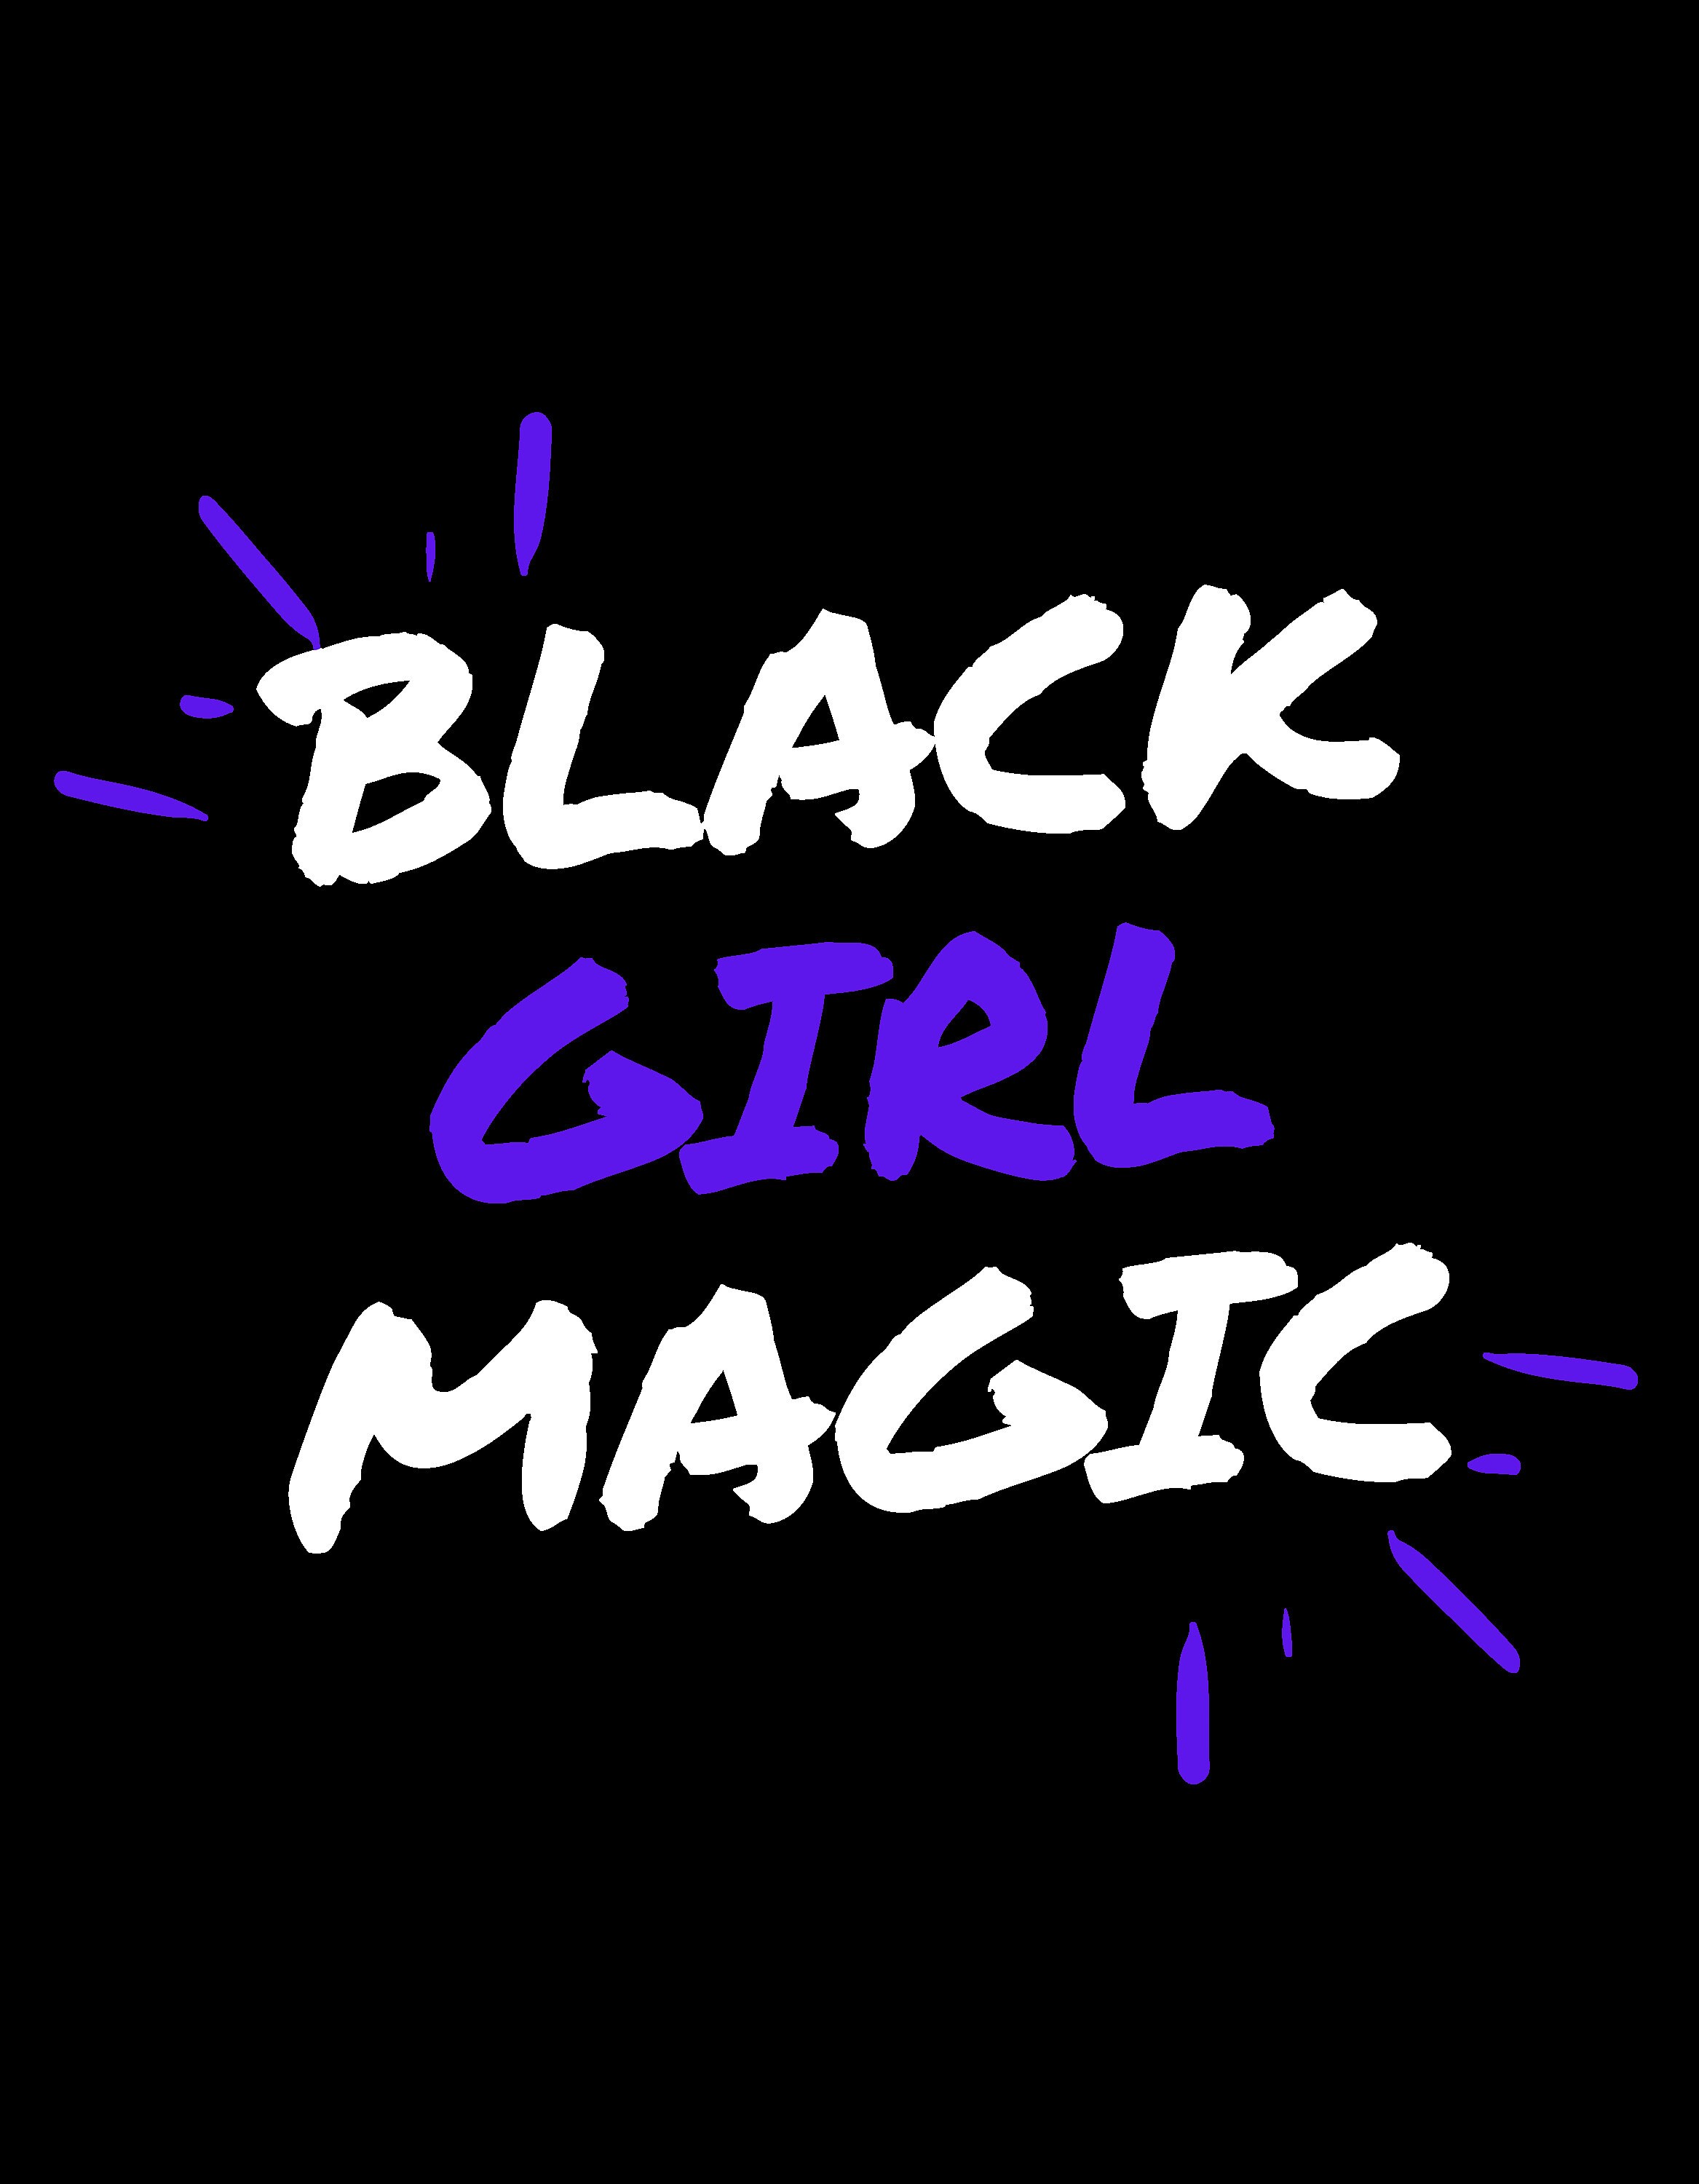 Clipart Black Girl Magic Instant Digital Download Great for | Etsy